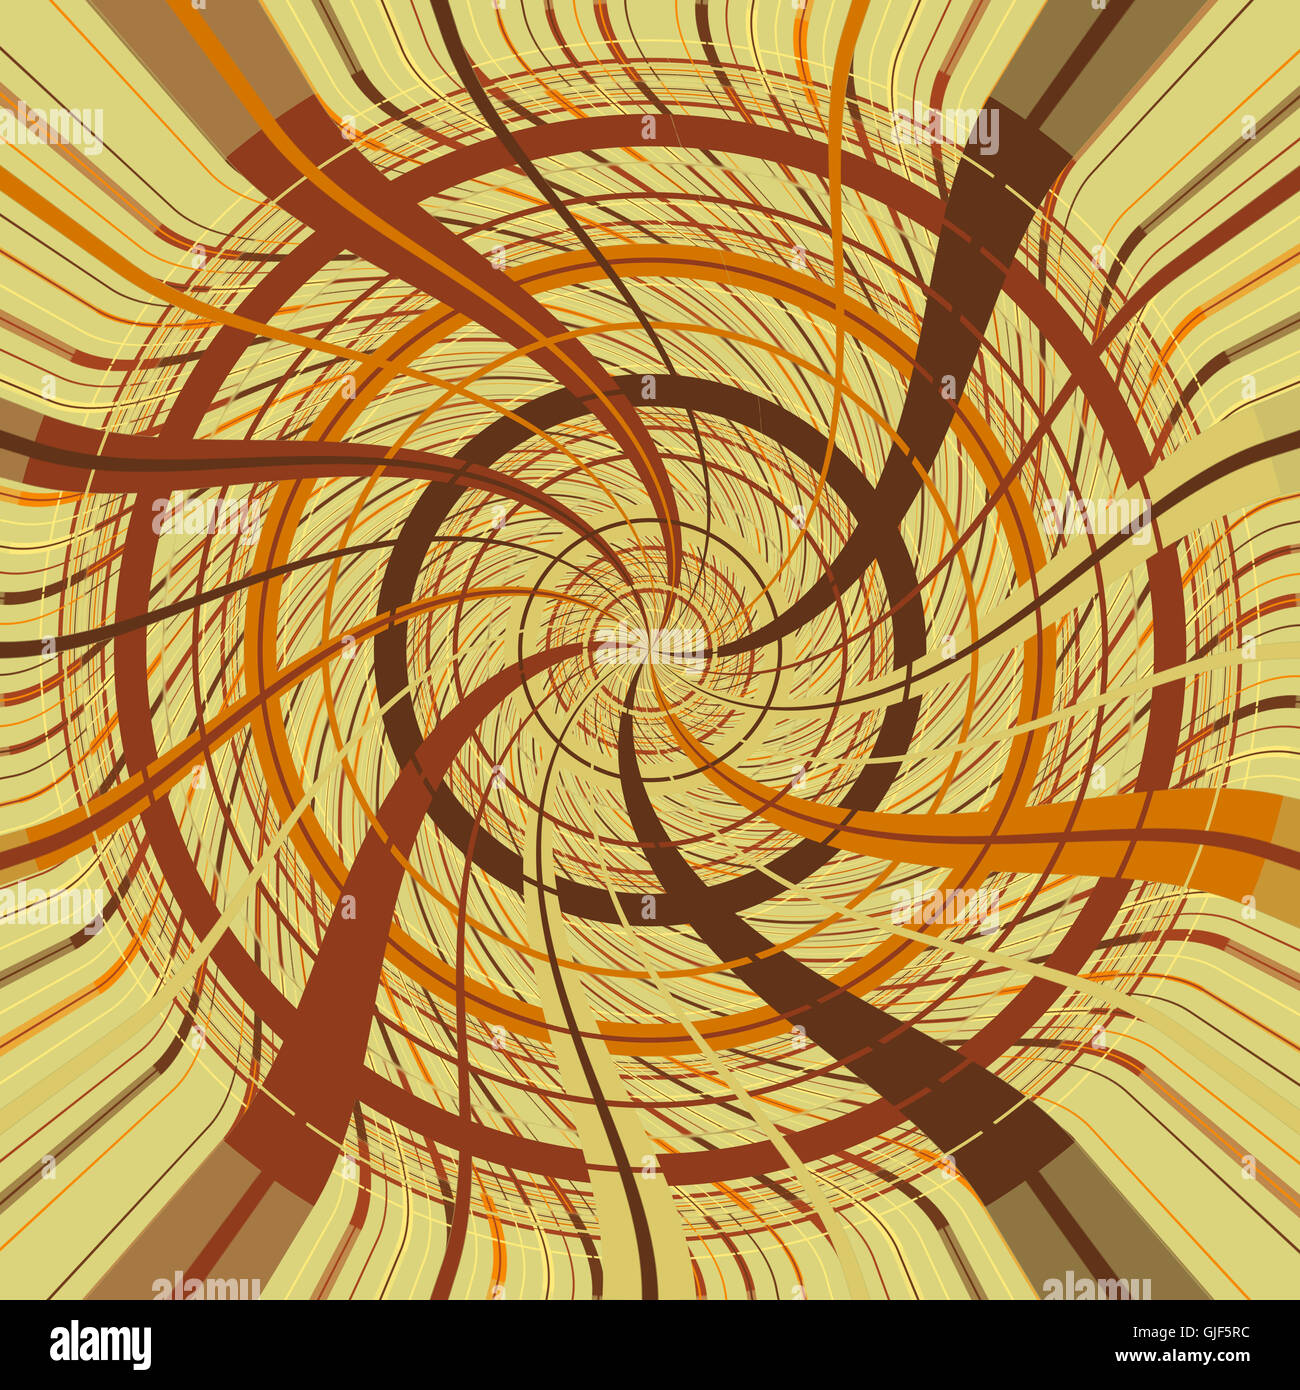 Vortex made with brown and orange lines on a tan background. Geometric digital art. Stock Photo